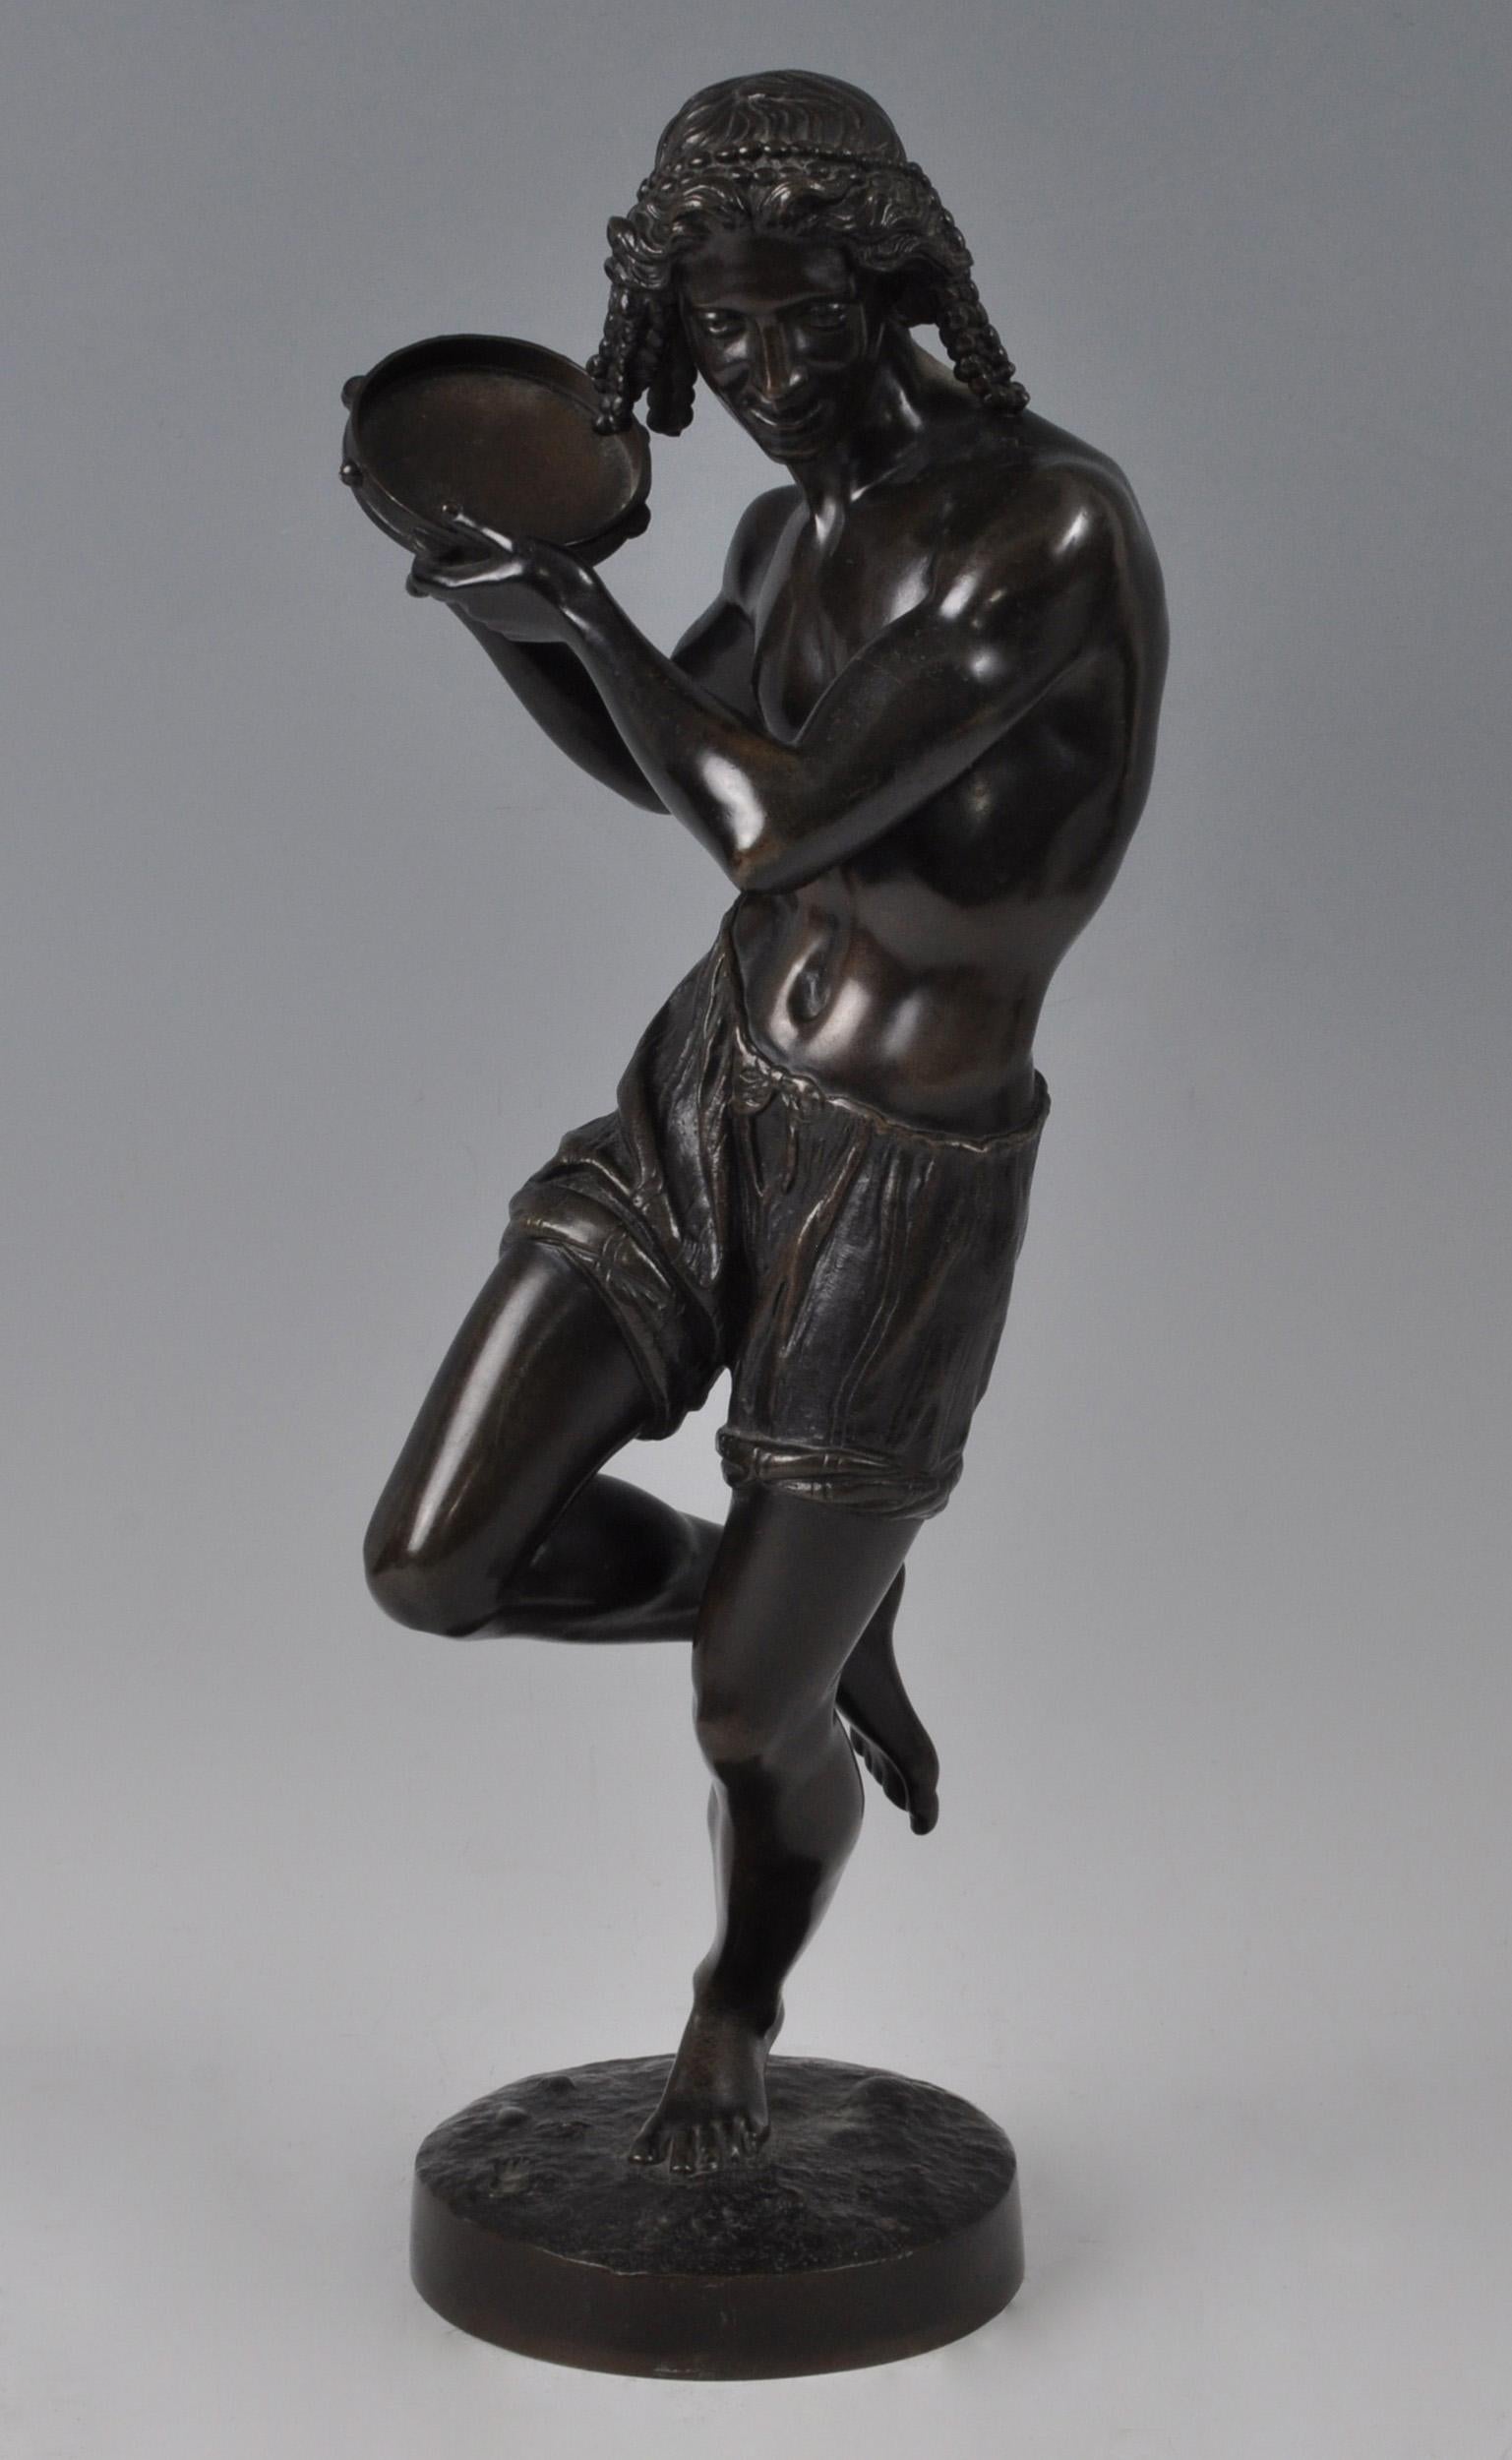 A large 19th century bronze statue of the Neopolitan Dancer with tambourine from a model by Francisque Joseph Duret. Signed to base Duret f. and with a handwritten inscription below ‘csl cts’.

In very good original condition.

Fransisque Joseph